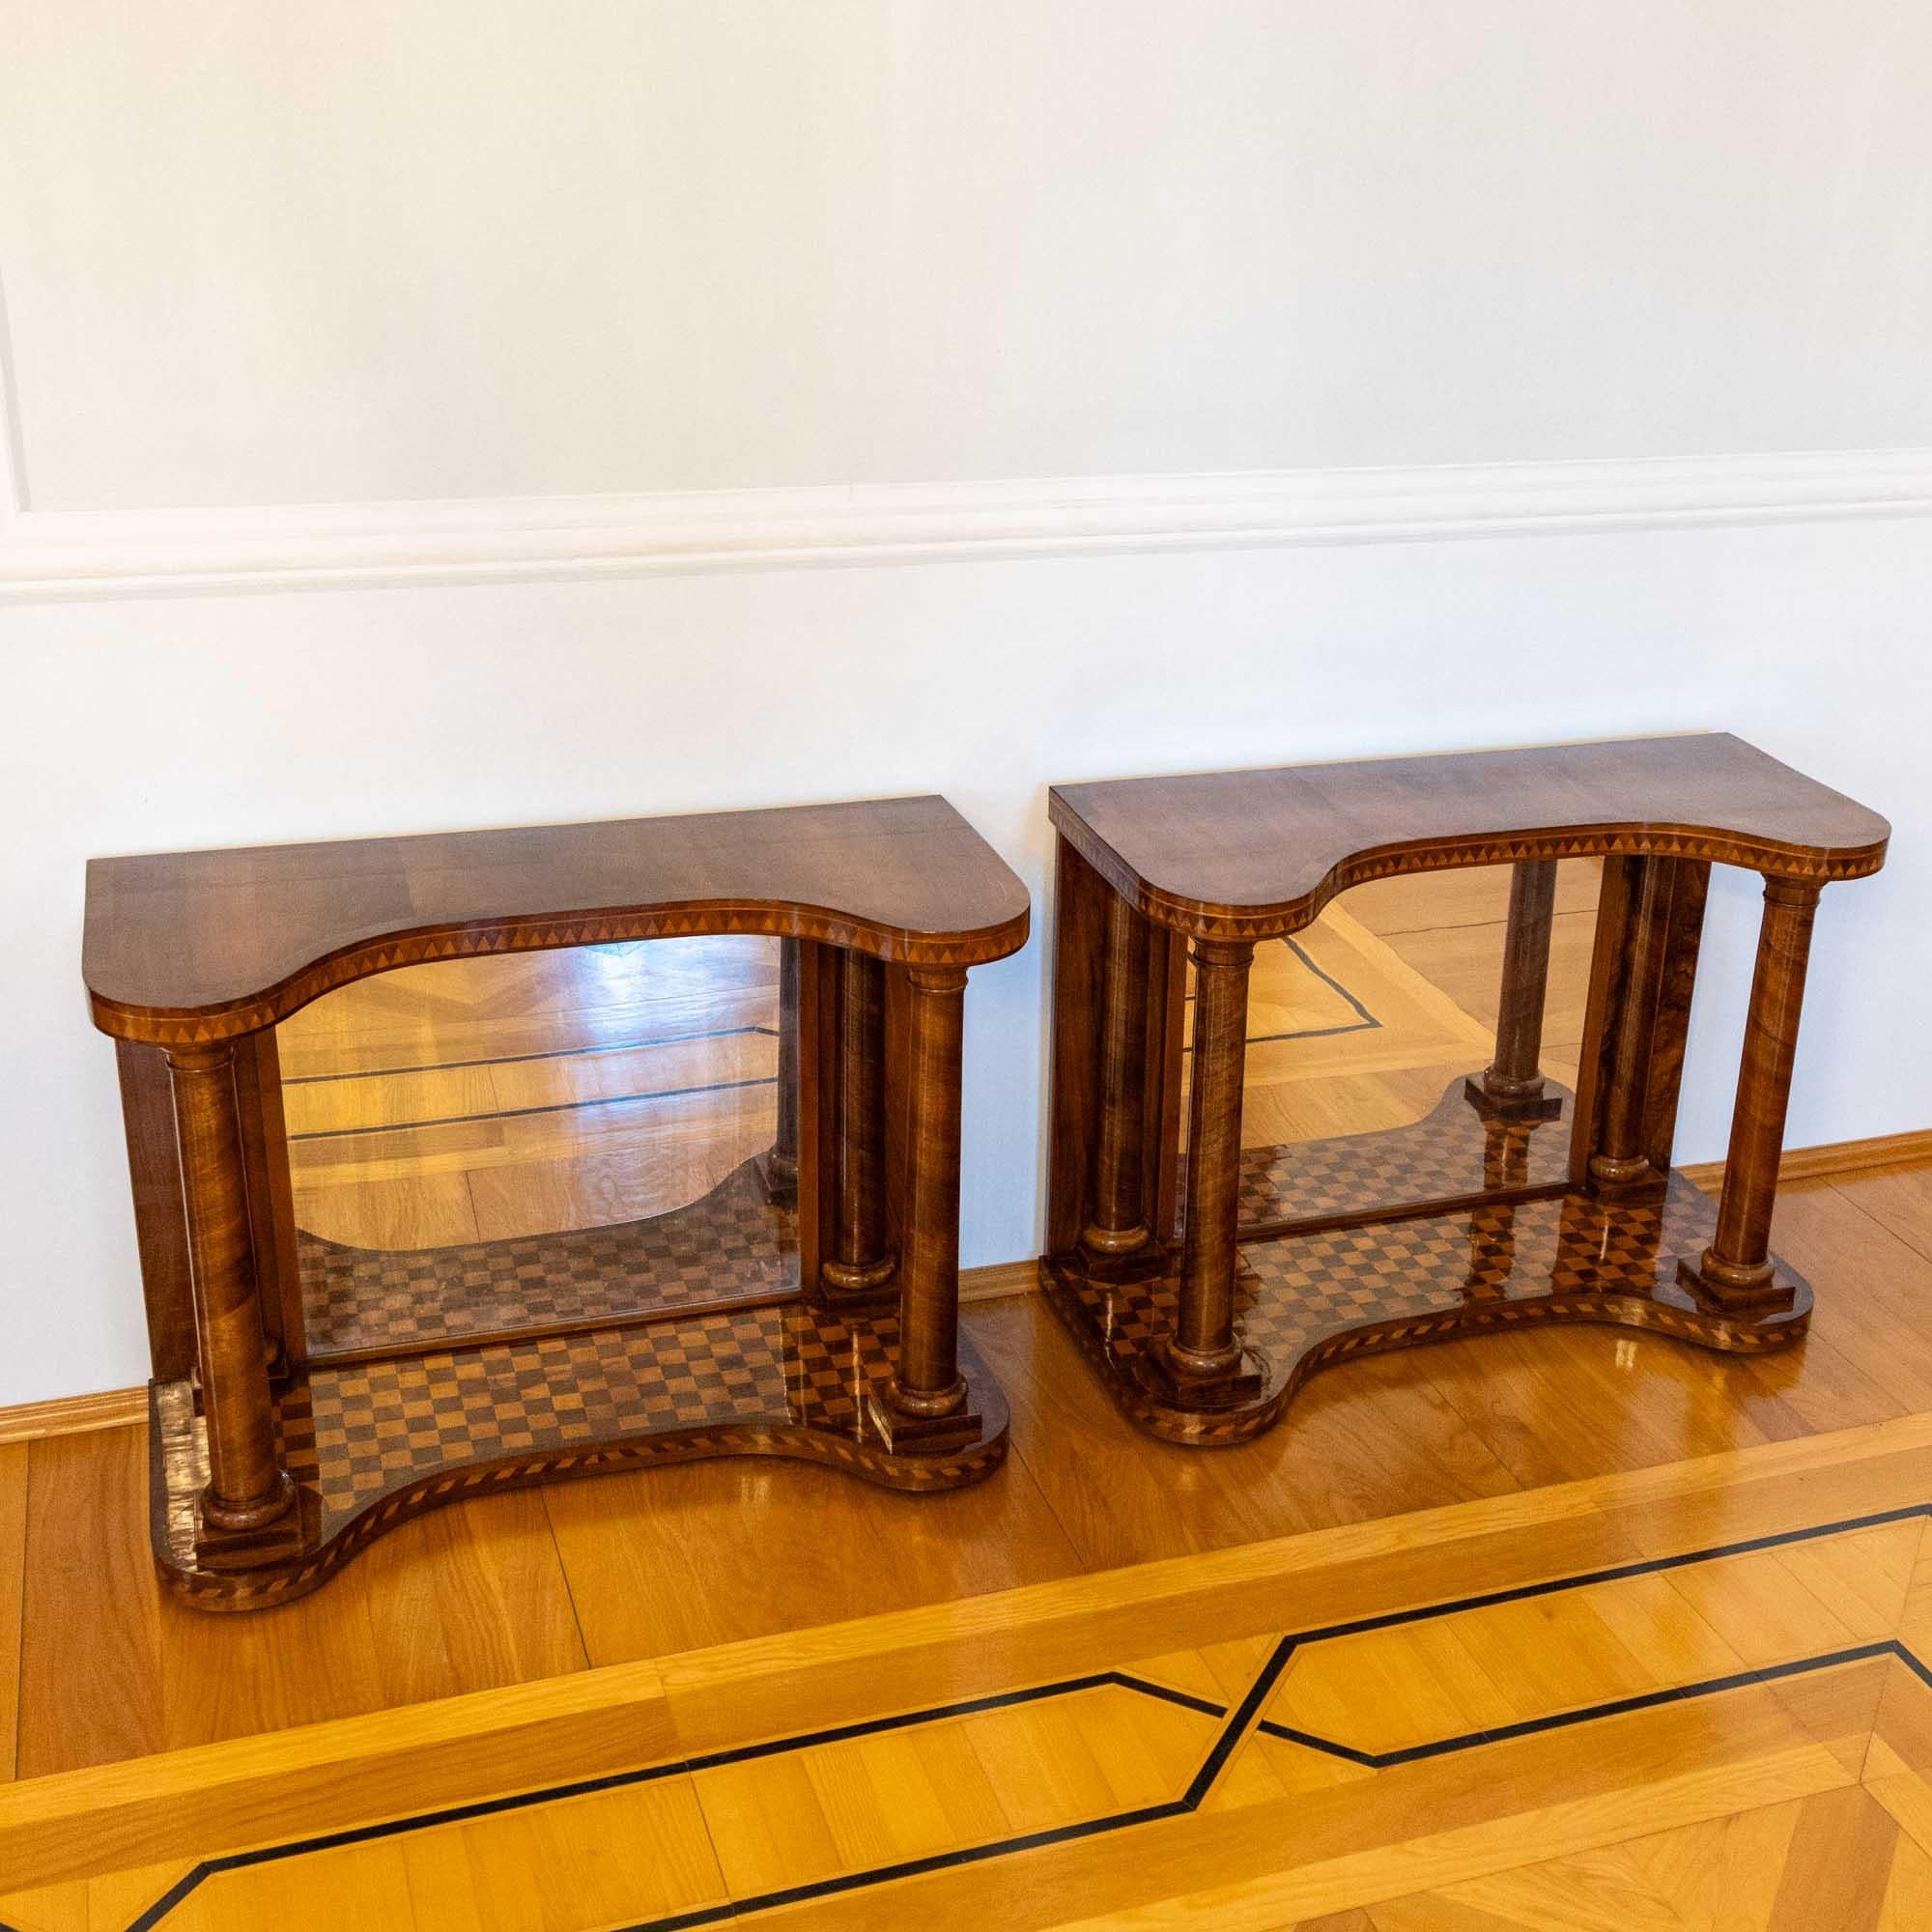 Veneer Pair of Parquetry Console Tables with Mirrors, Mid-19th Century For Sale